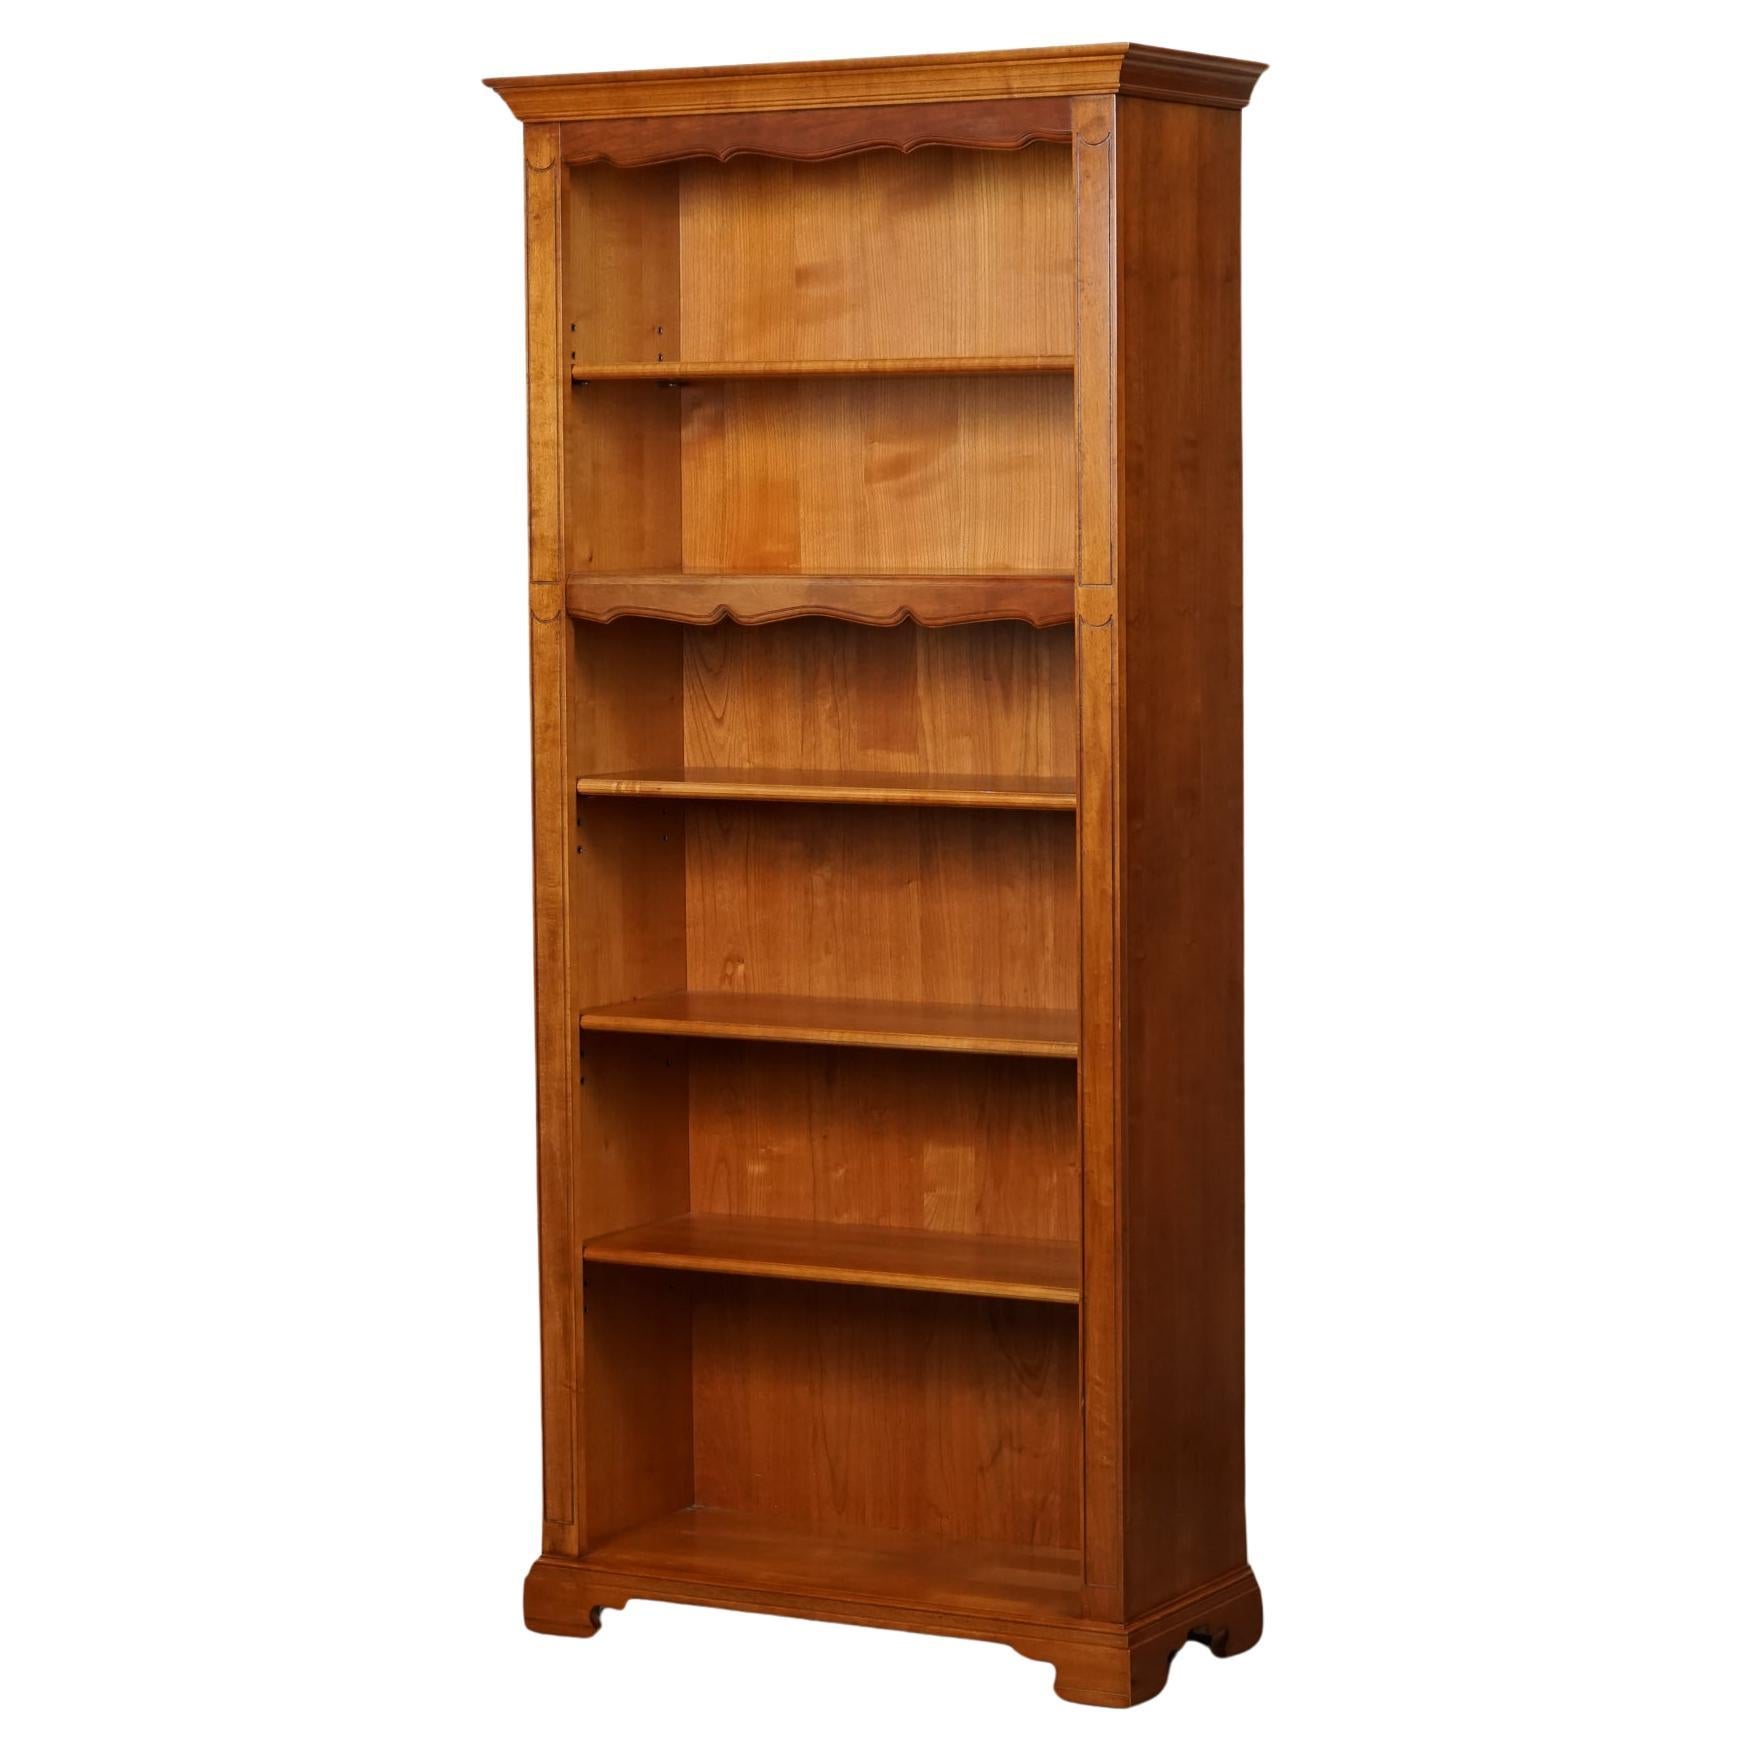 VINTAGE TALL OPEN SOLID BOOKCASE 5 SHELVES MADE BY YOUNGER FURNITURE LONDON j1